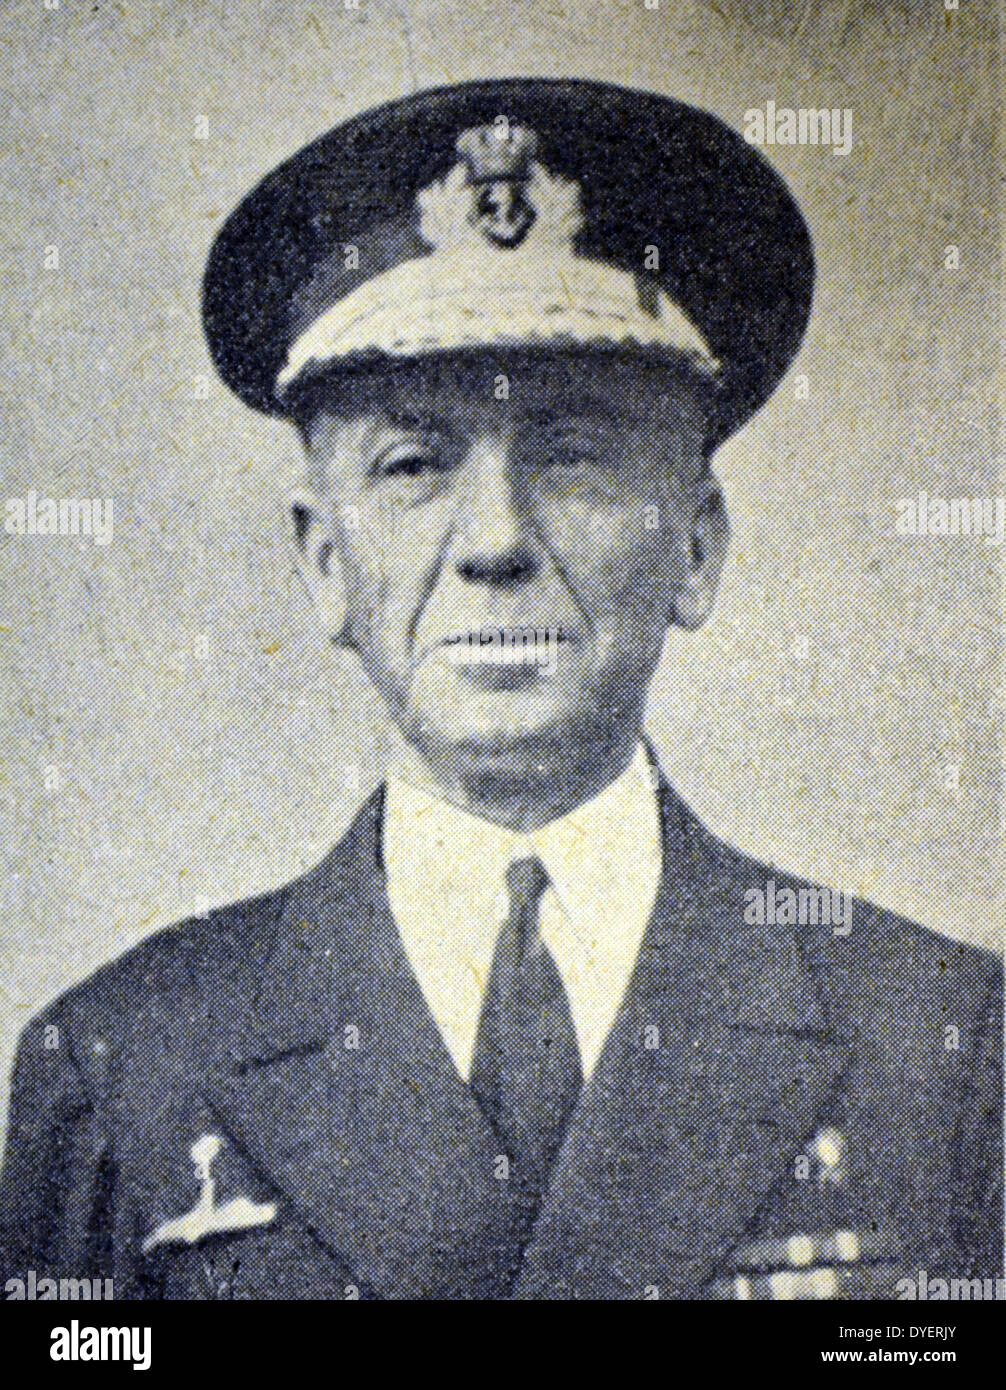 Almirante Mateo Garcia de los Reyes was a military, marine and Spanish politician, leader and organizer of the first Spanish Underwater Weapon born February 6, 1872 in Montevideo (Uruguay), where his father was stationed as commander of the Spanish frigate 'Almansa' , and executed on November 24, 1936 in Paracuellos del Jarama (Madrid). Stock Photo